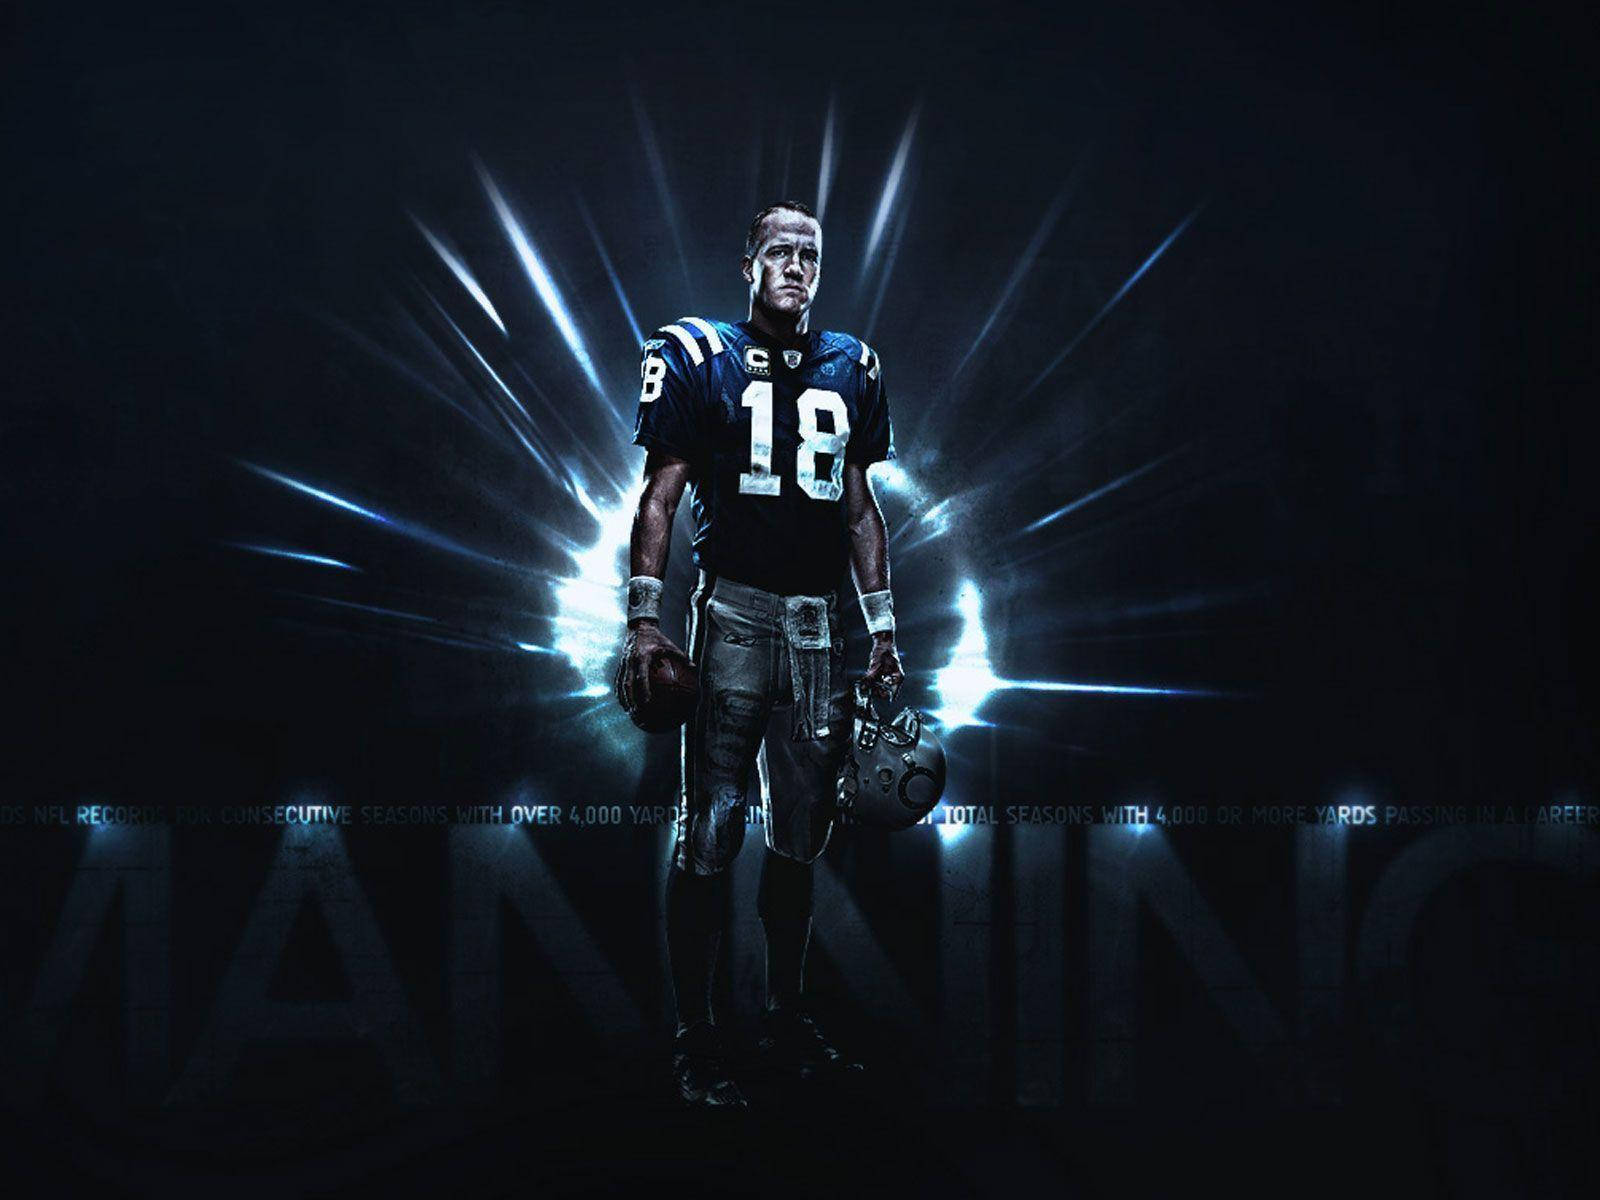 Download wallpapers Peyton Manning 4k wide receiver Denver Broncos  american football NFL Peyton Williams Manning National Football League  neon lights creative for desktop with resolution 3840x2400 High Quality  HD pictures wallpapers